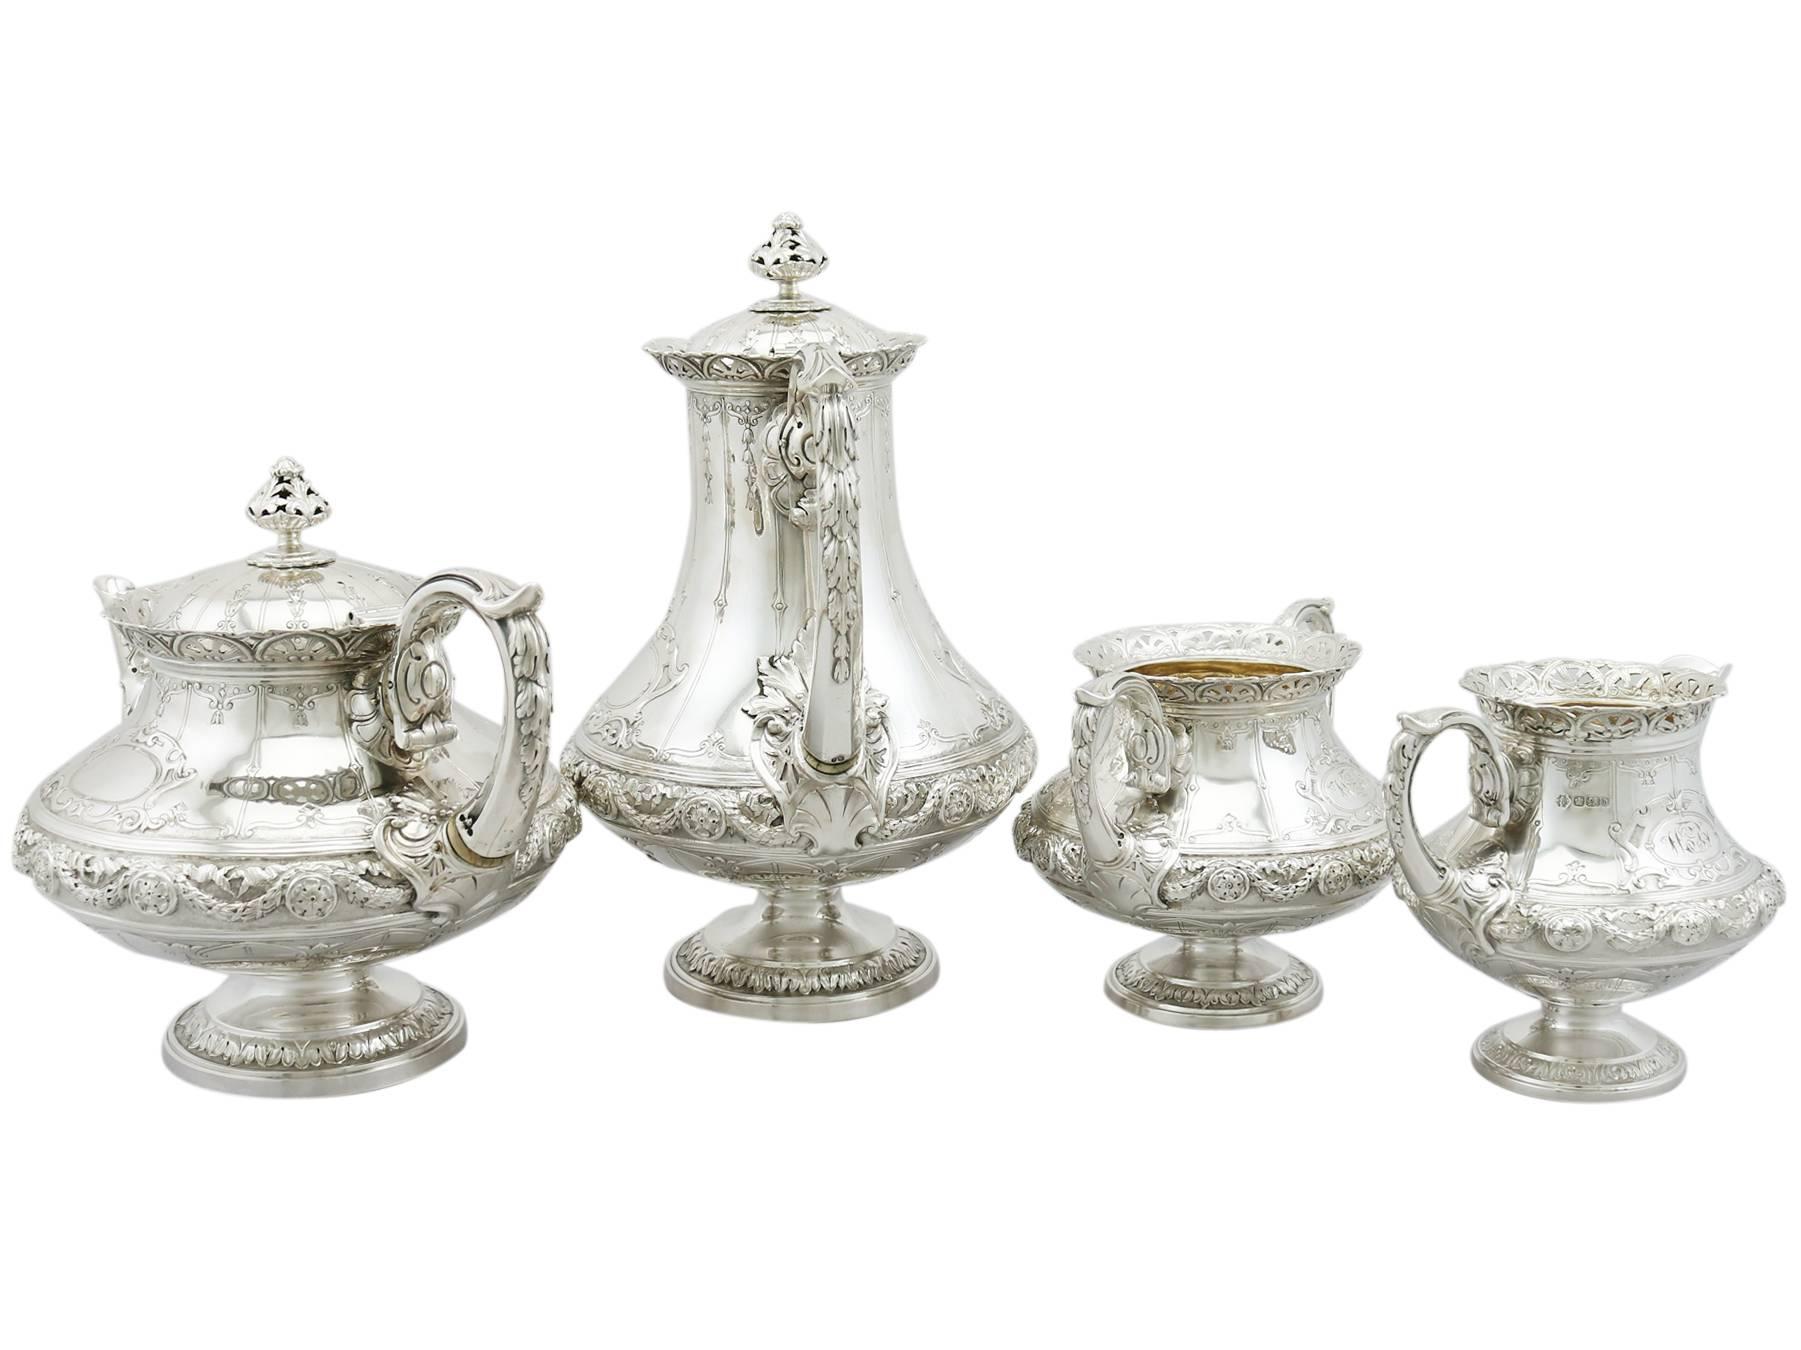 An exceptional, fine and impressive, composite antique Victorian English sterling silver four-piece tea and coffee service/set; part of our silver tea ware collection.

This exceptional antique Victorian sterling silver four-piece tea set consists